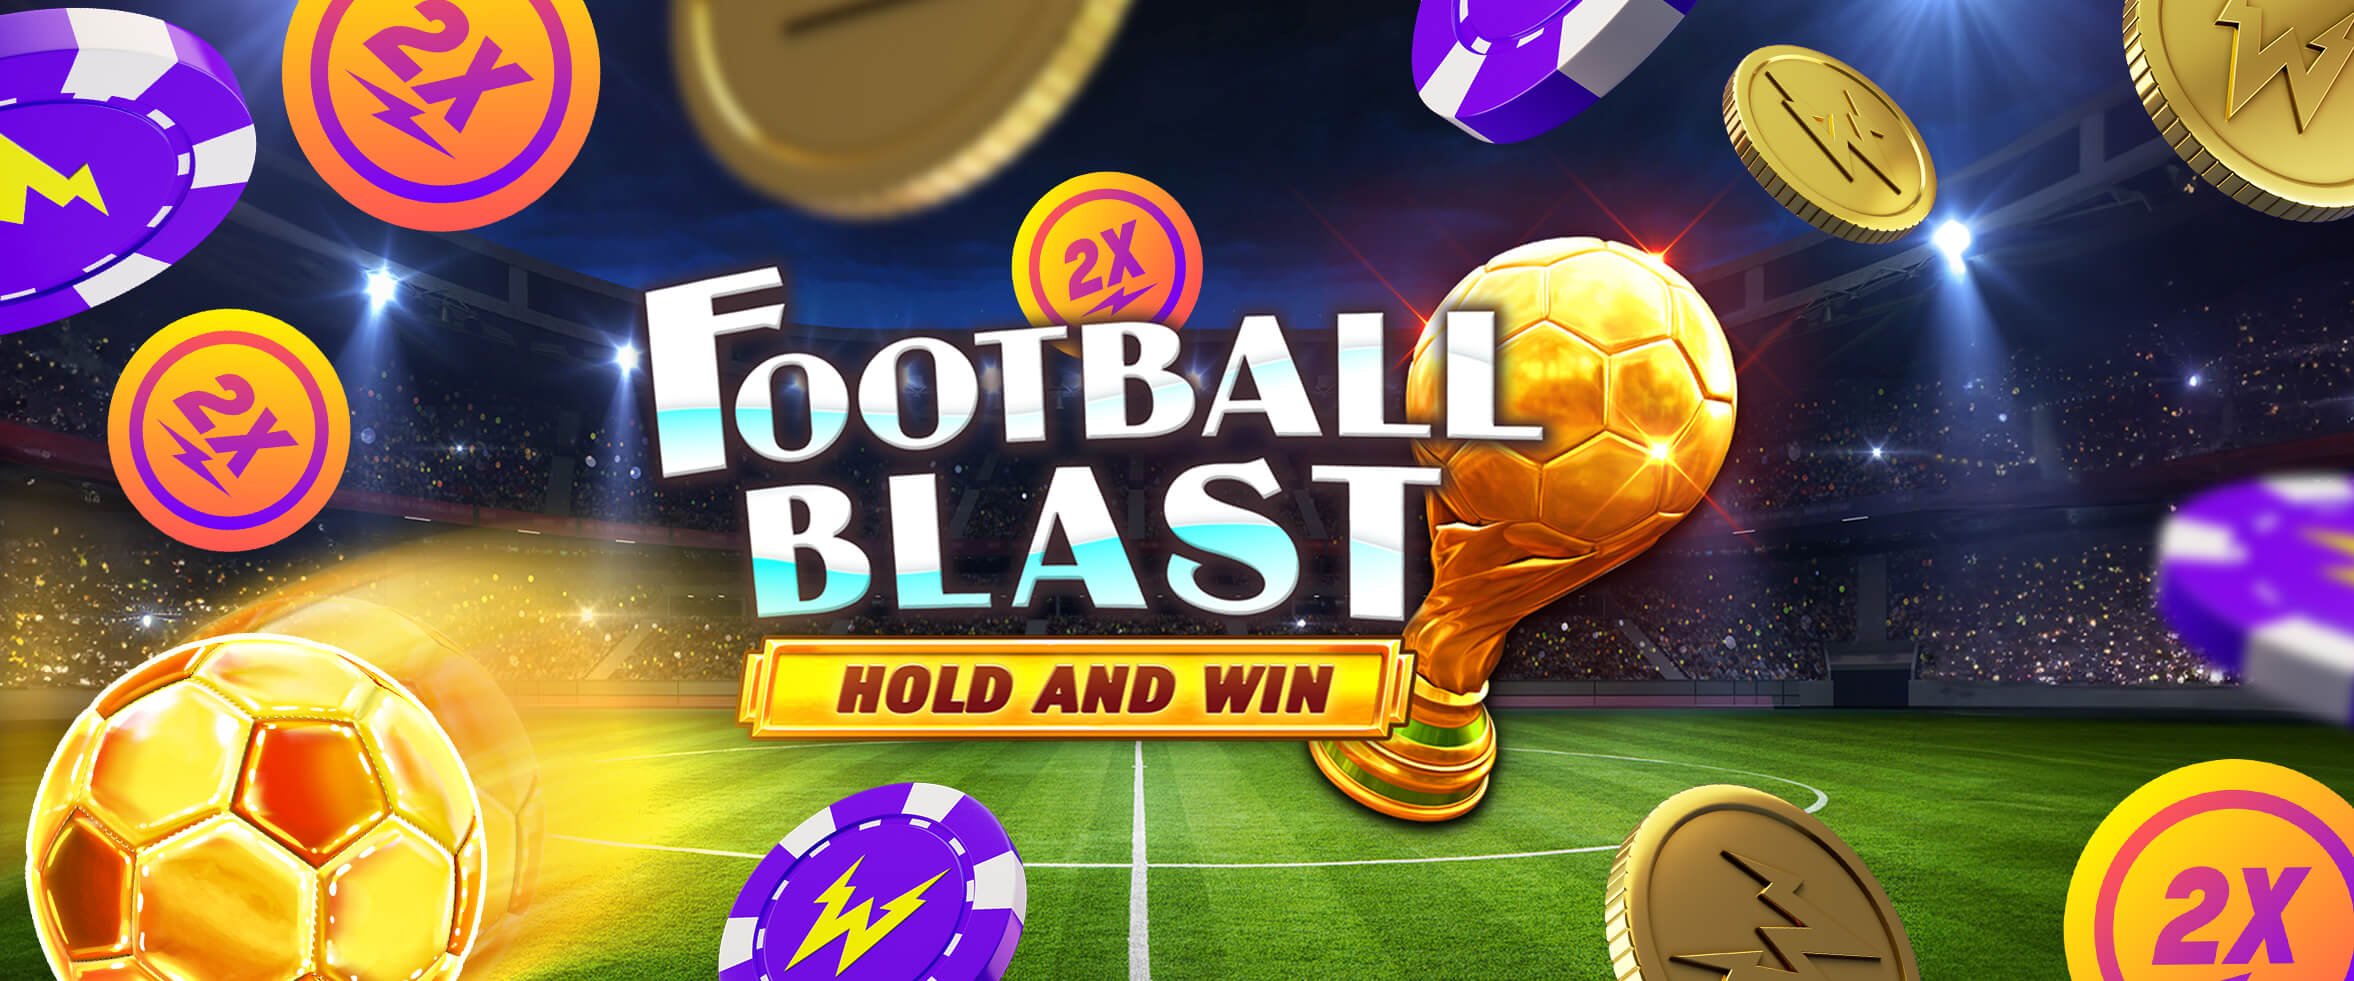 2x Speed and Free Spins on New Exclusive: Football Blast